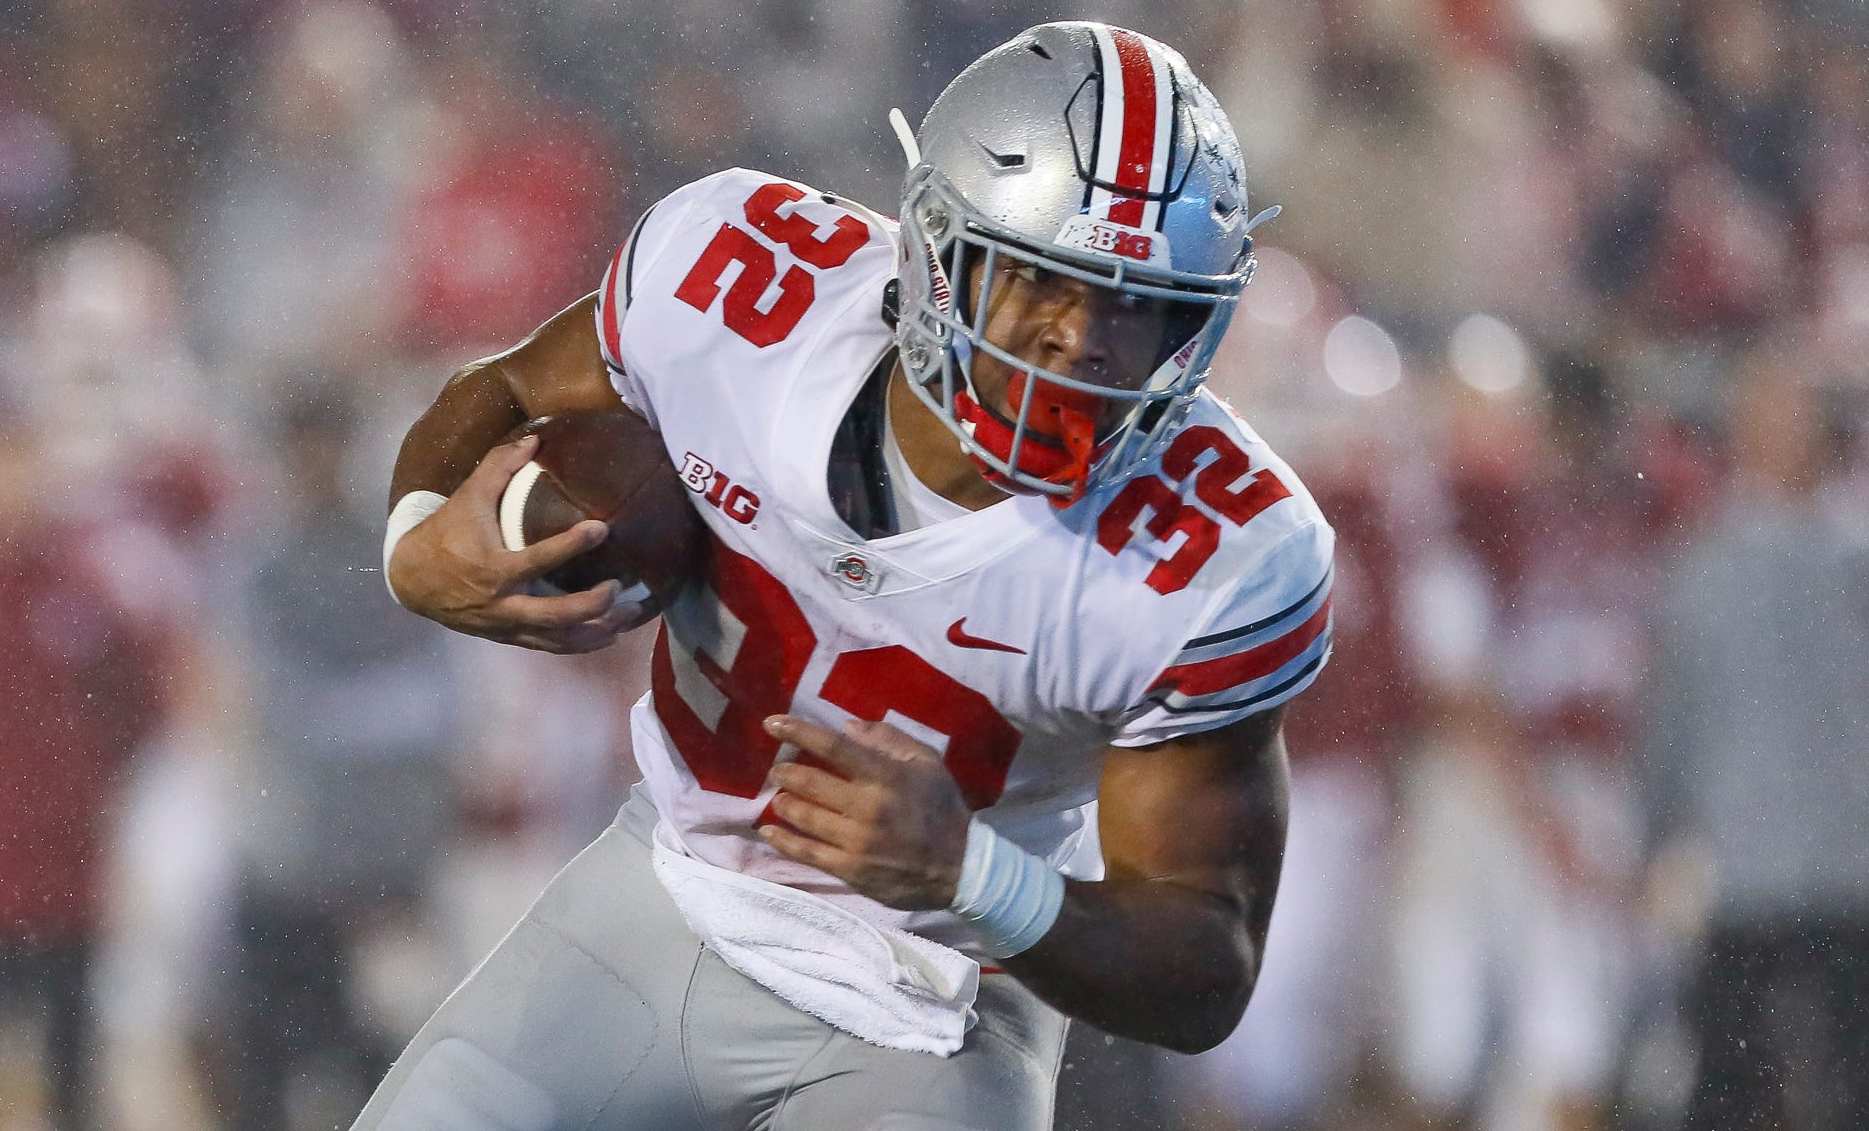 Ohio State opens the college football season at home against Notre Dame